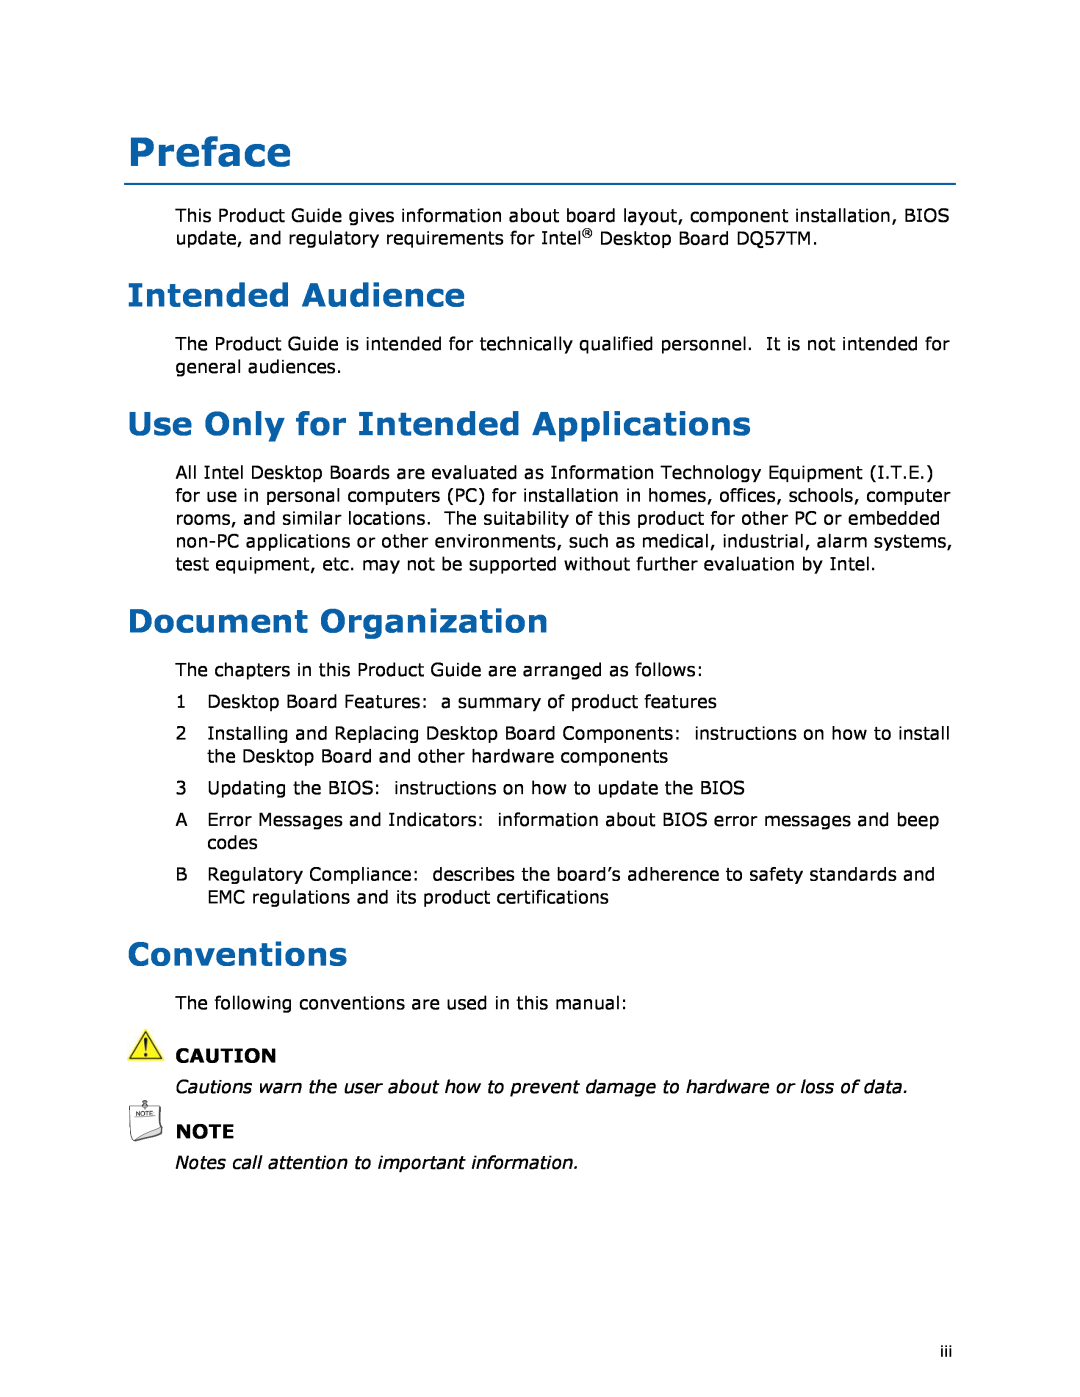 Intel DQ57TM manual Preface, Intended Audience, Use Only for Intended Applications, Document Organization, Conventions 